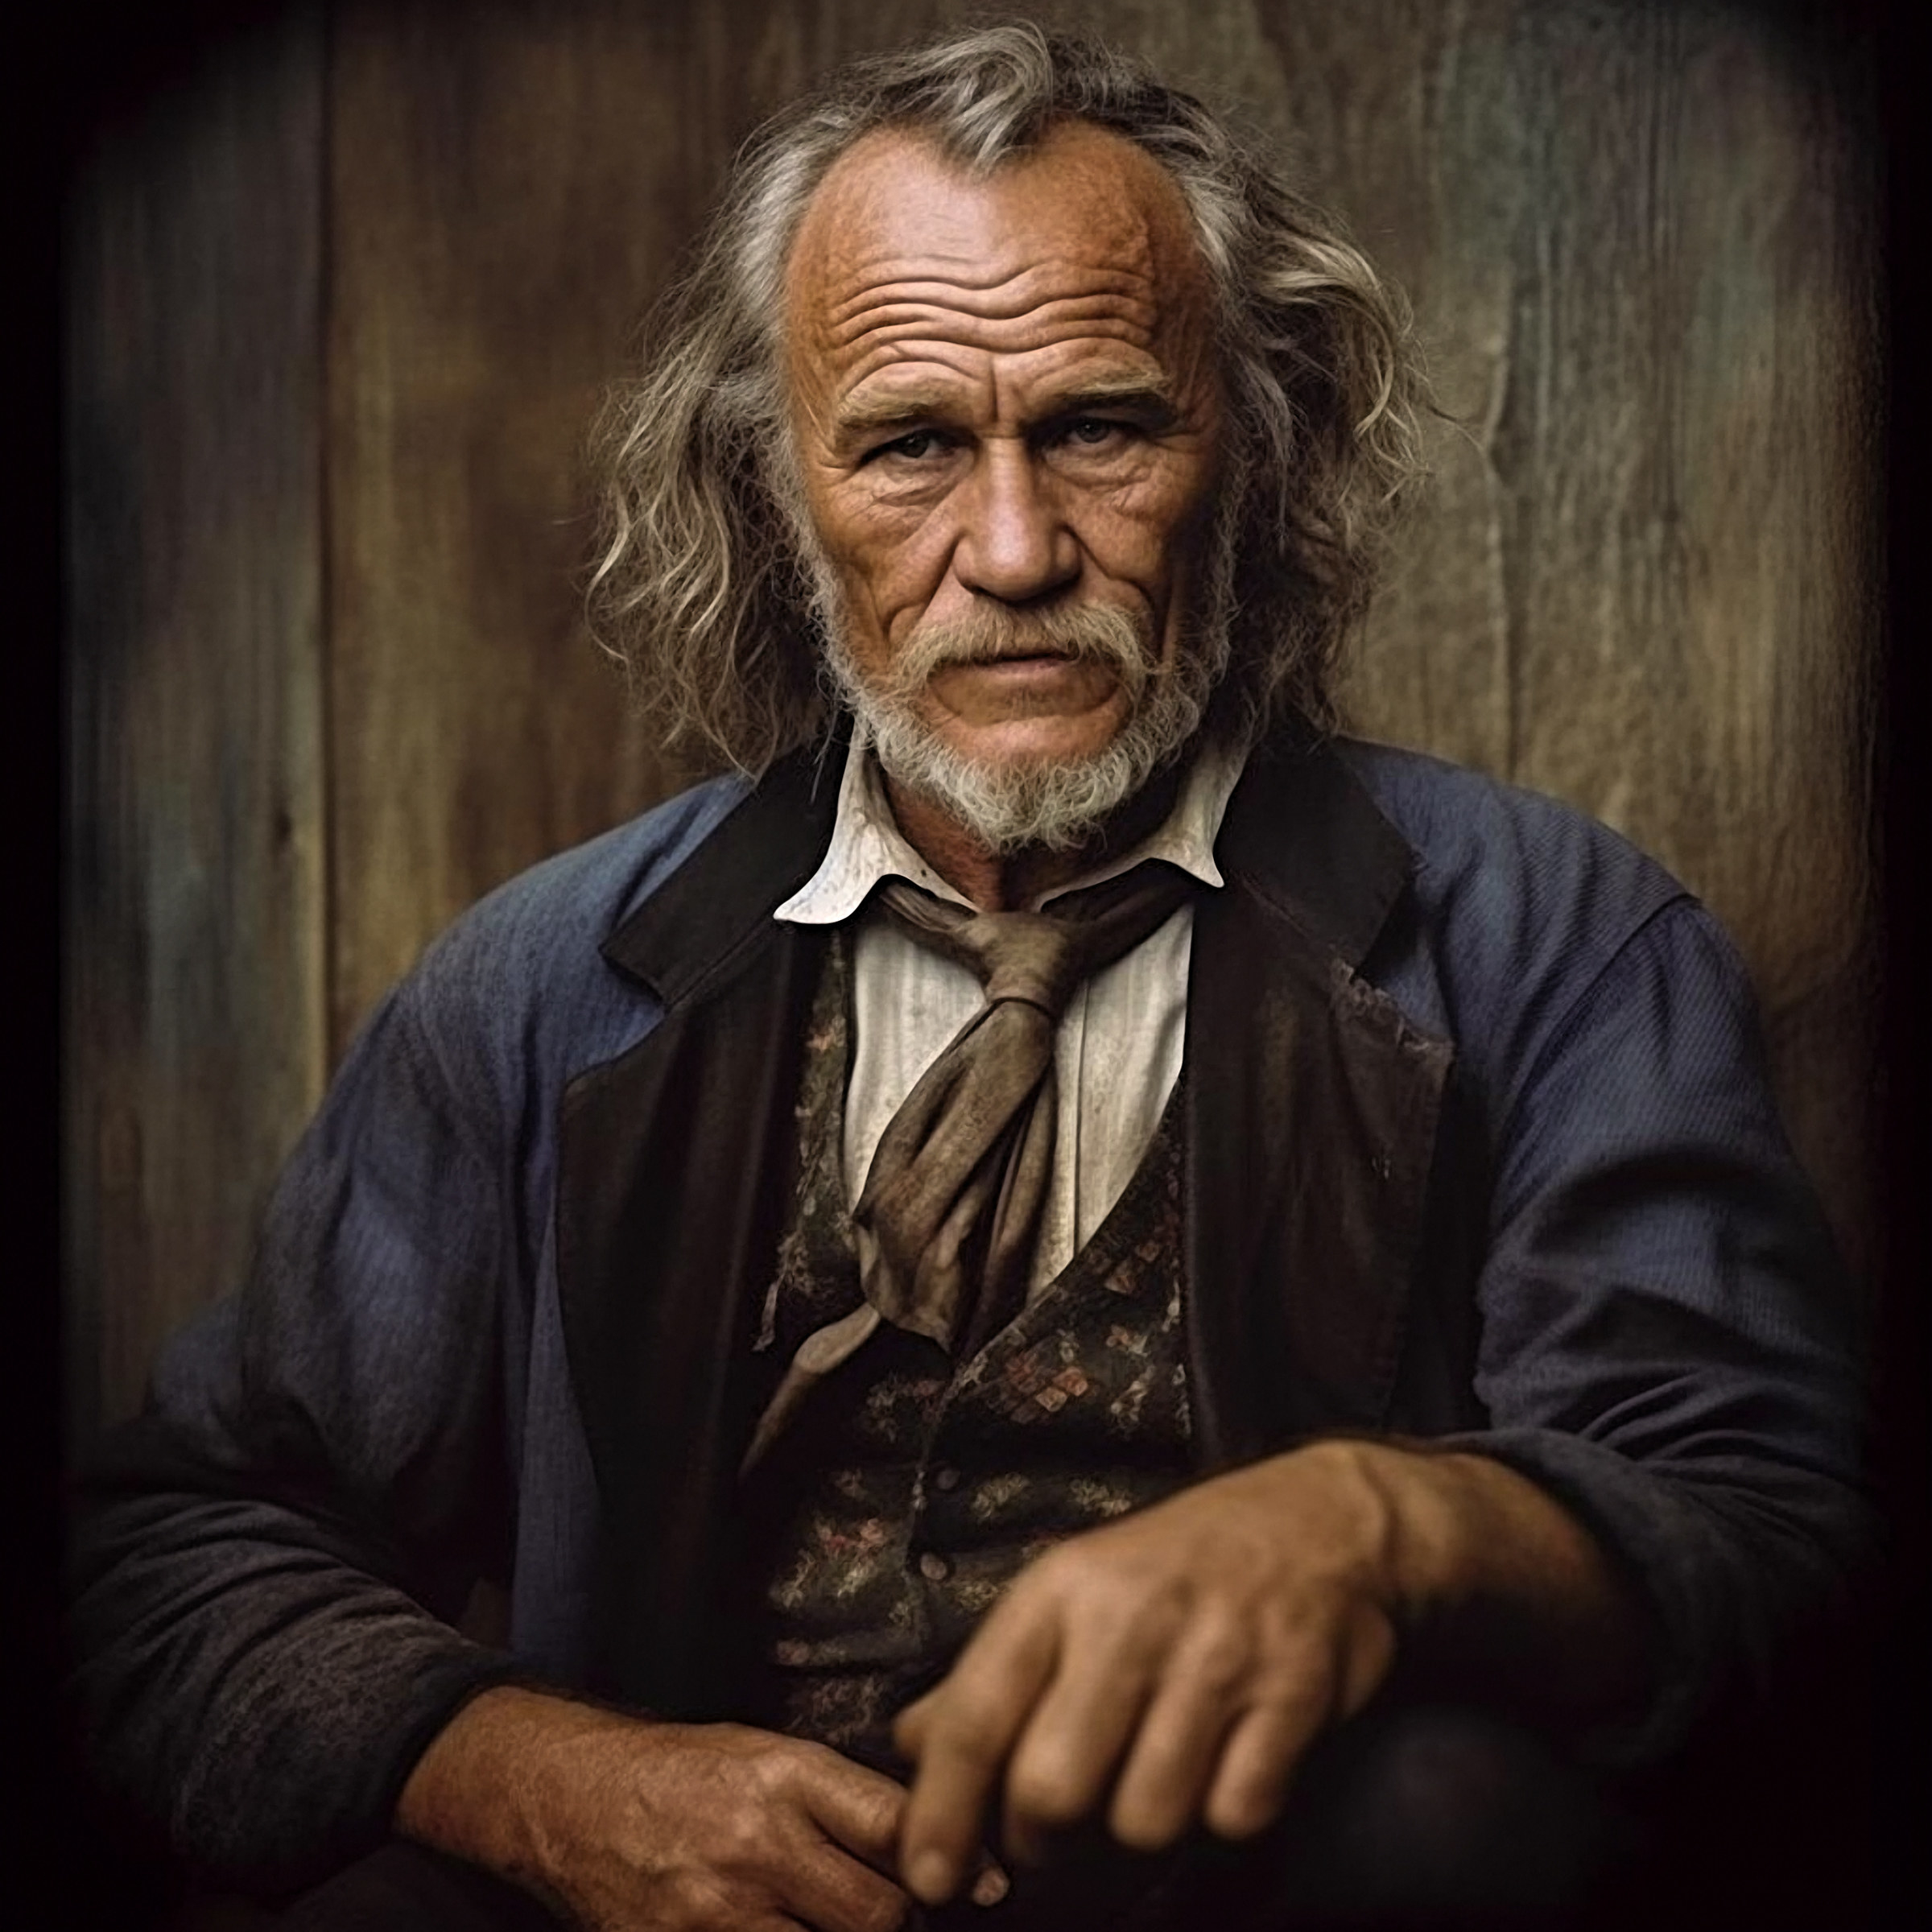 Ledger imagined as an older person